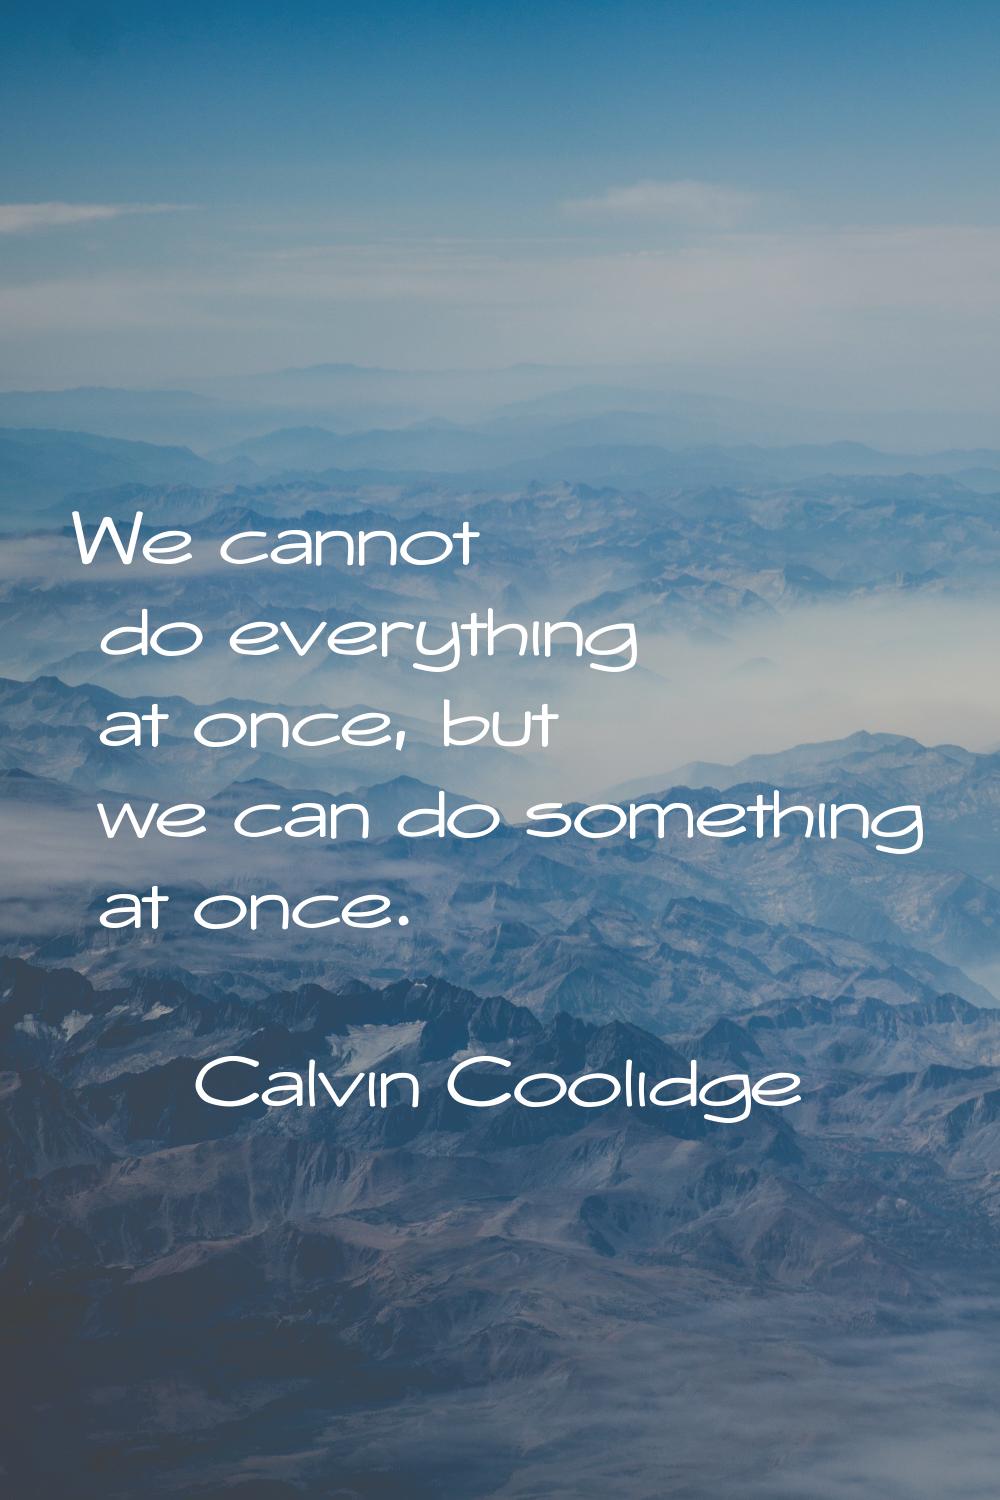 We cannot do everything at once, but we can do something at once.